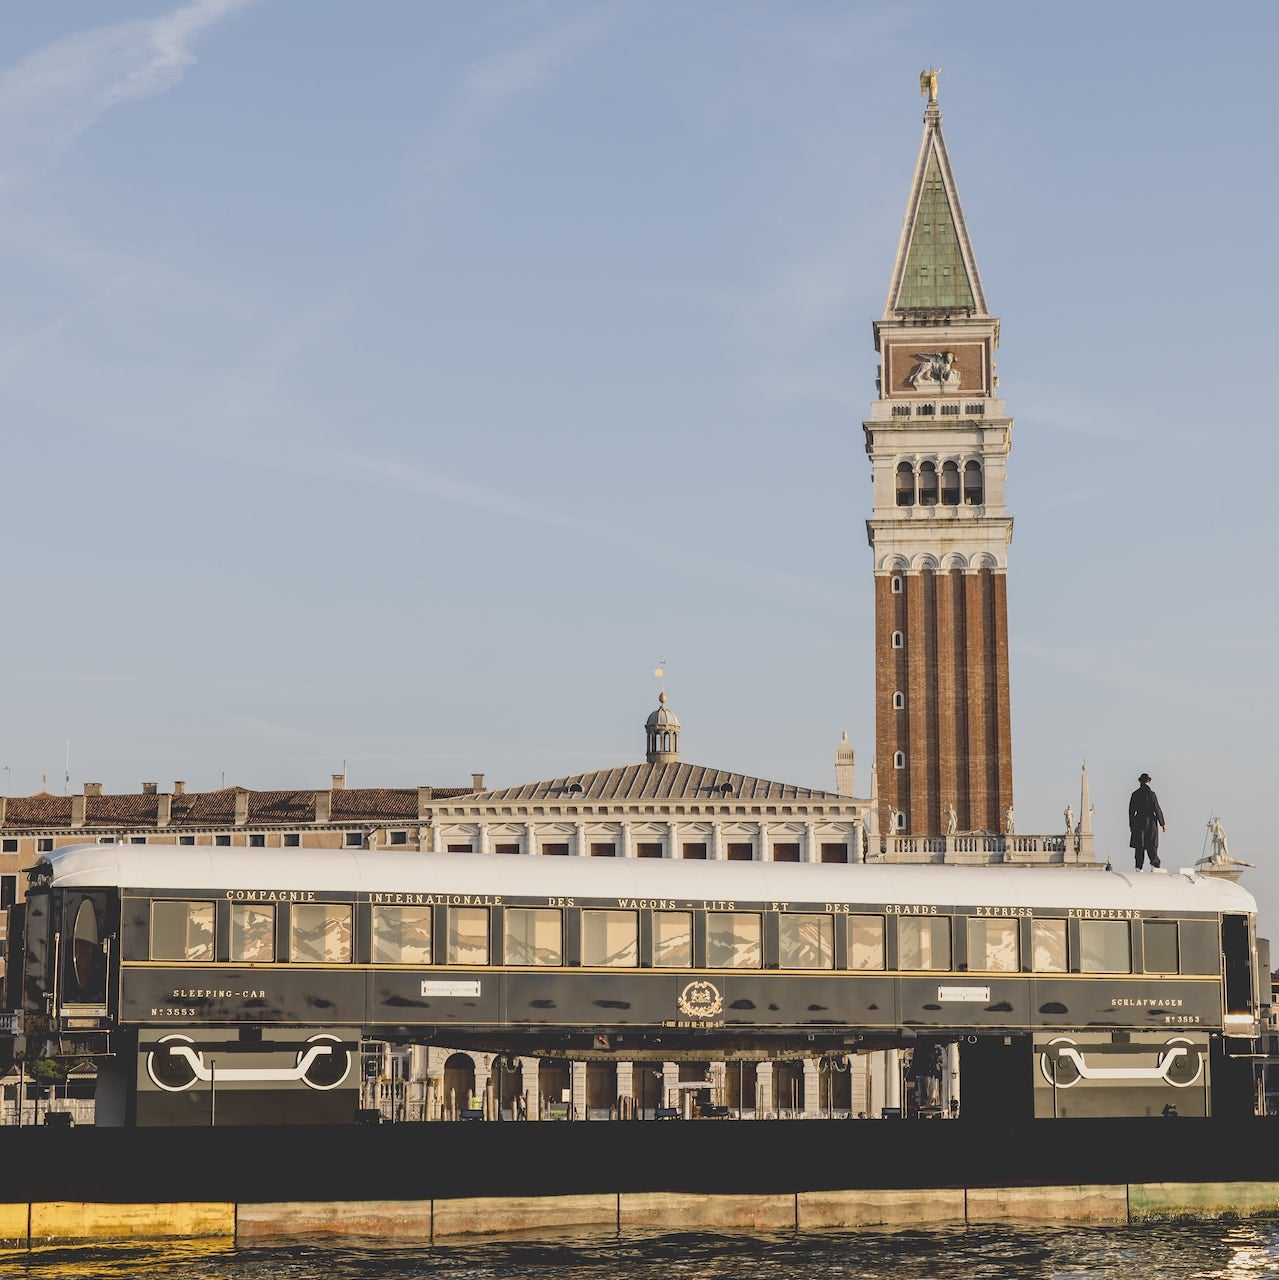 Venice Simplon-Orient-Express Presents One-of-a-kind Sleeper